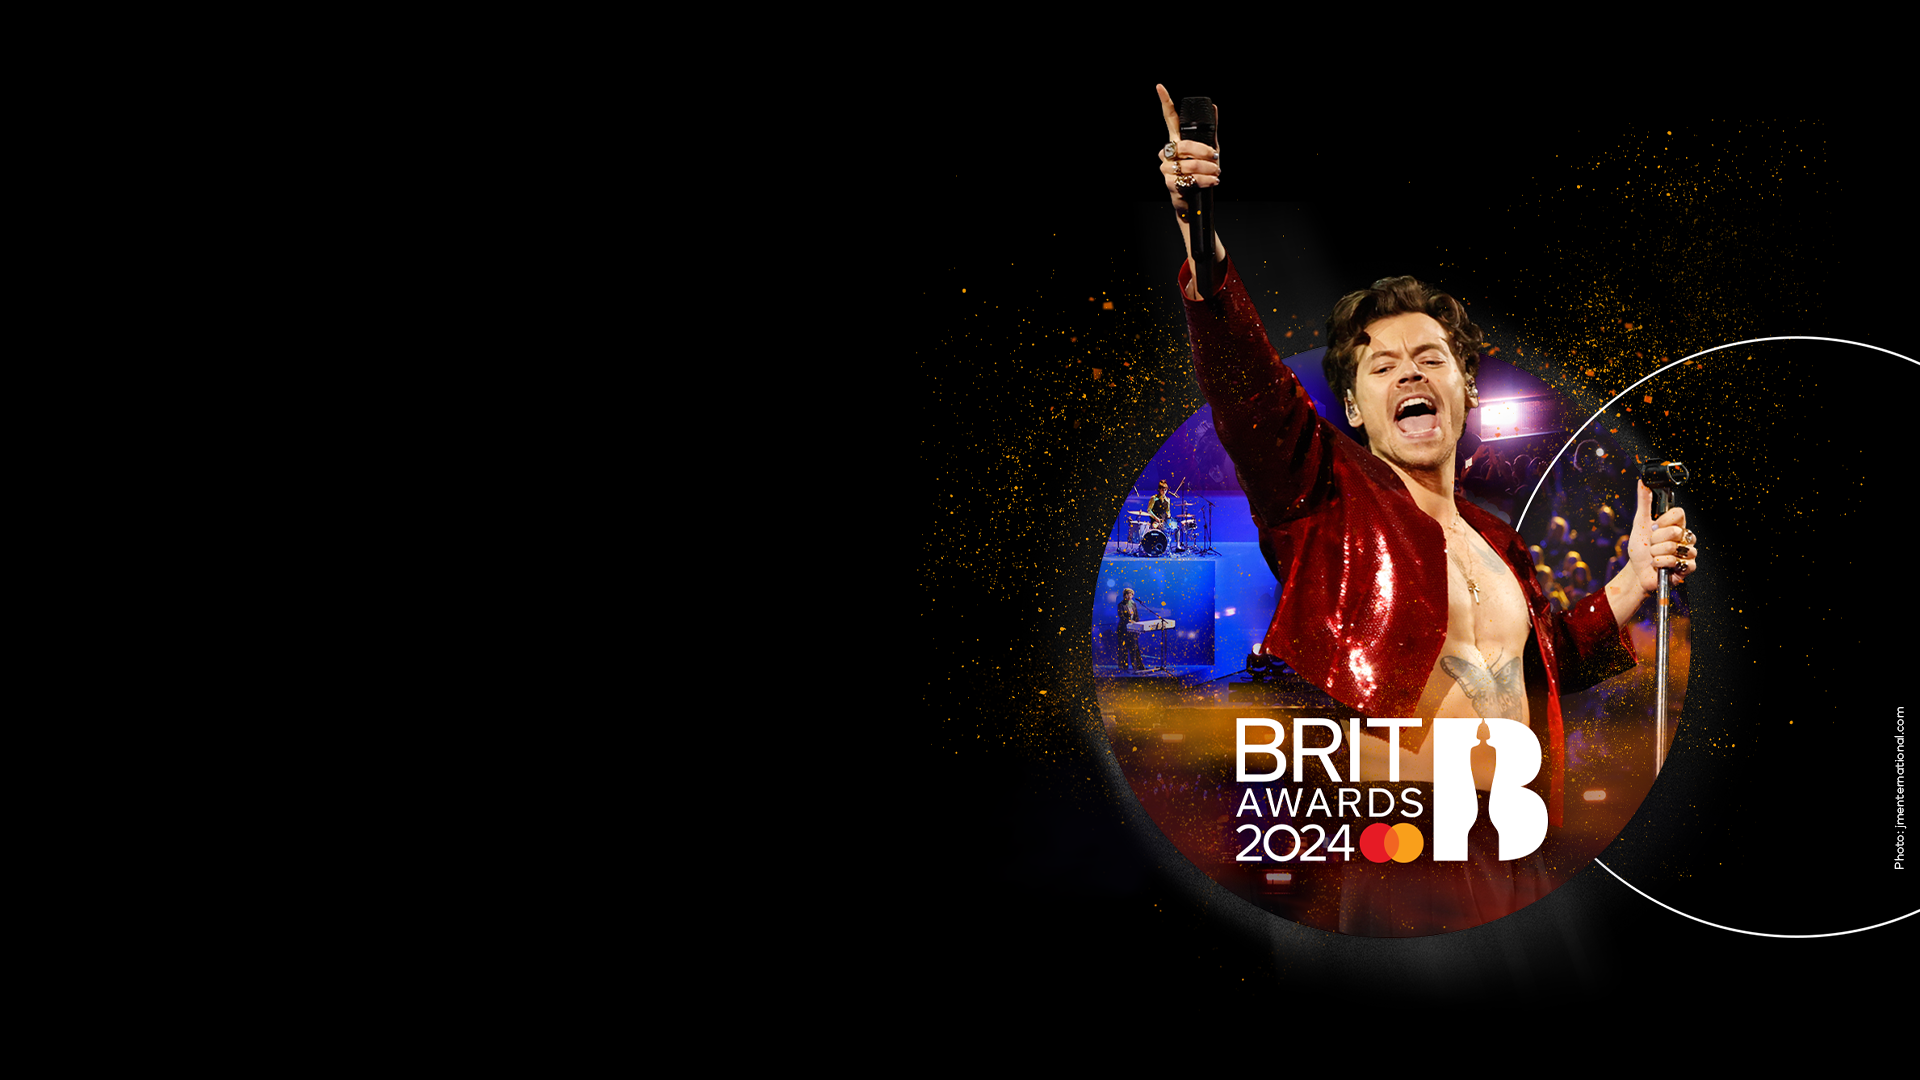 The BRIT Awards 2024